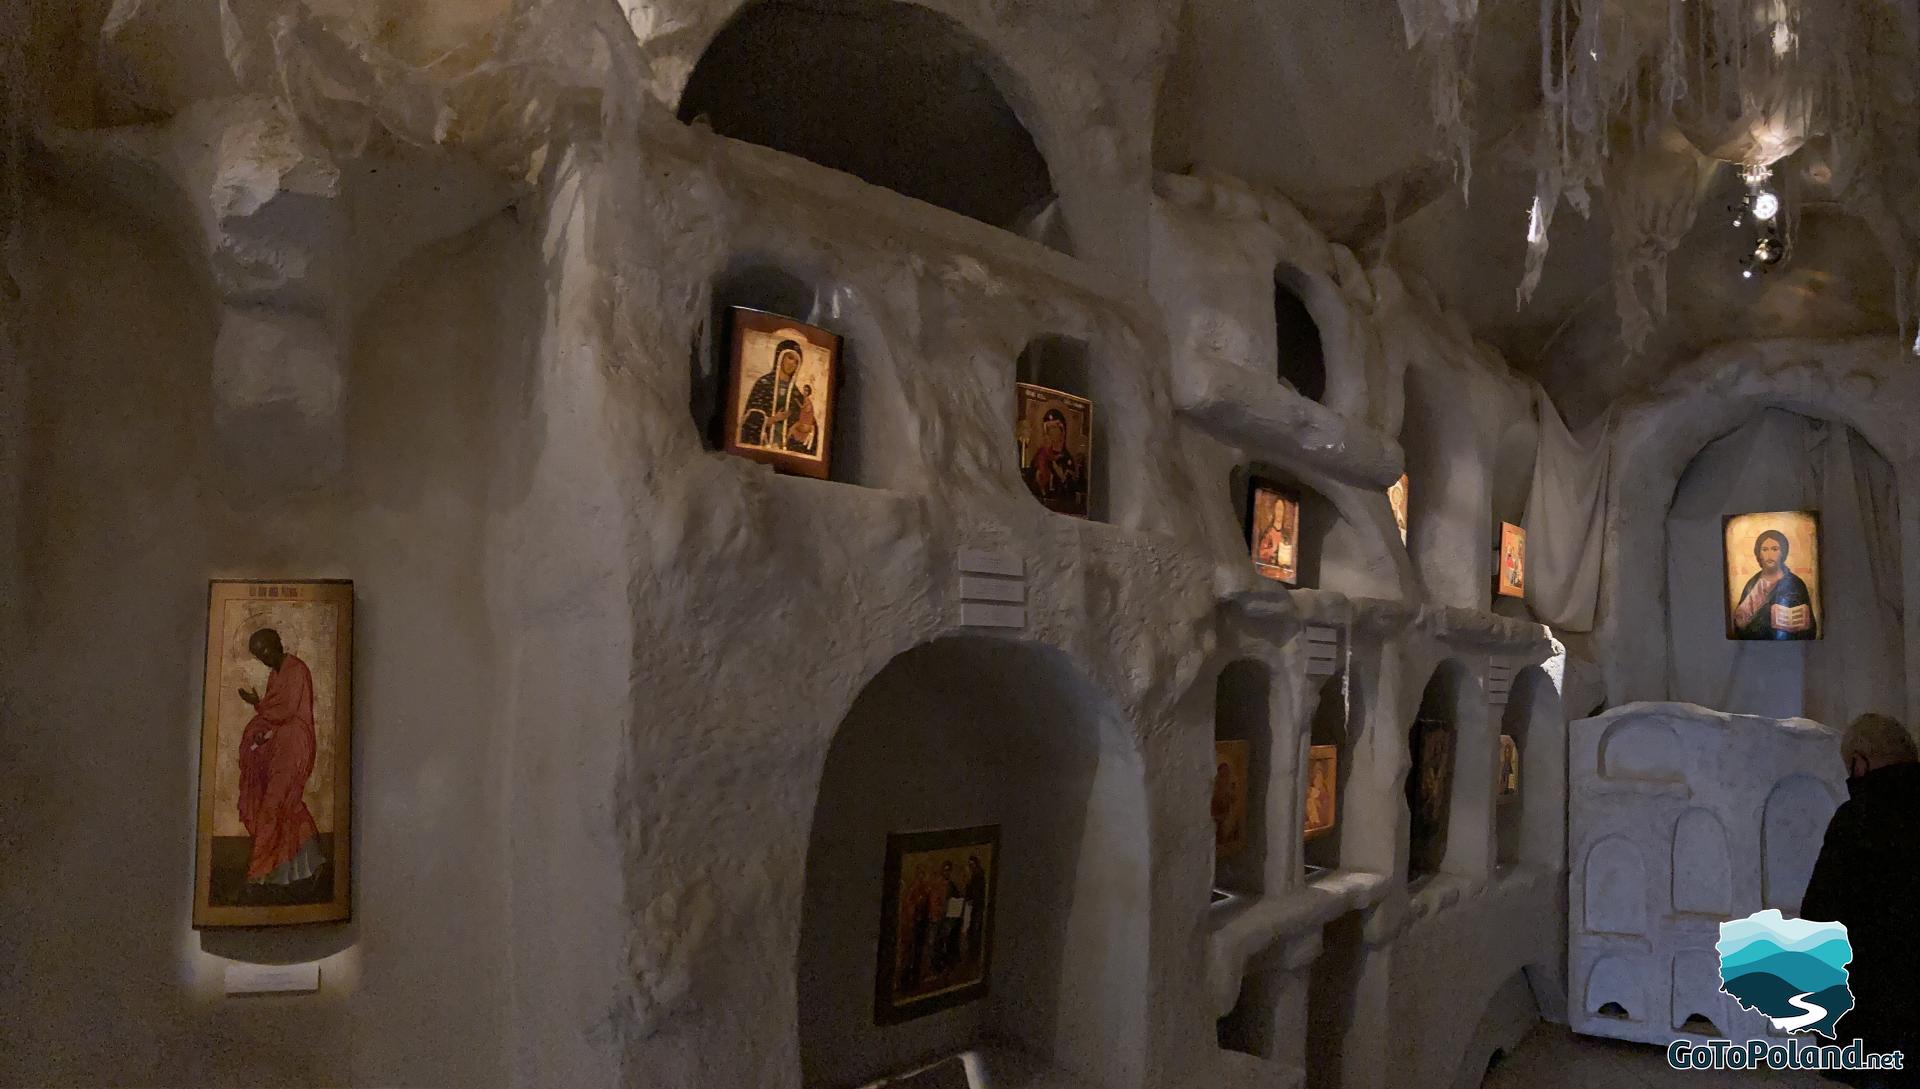 different icons in a room stylized as a hermits cave